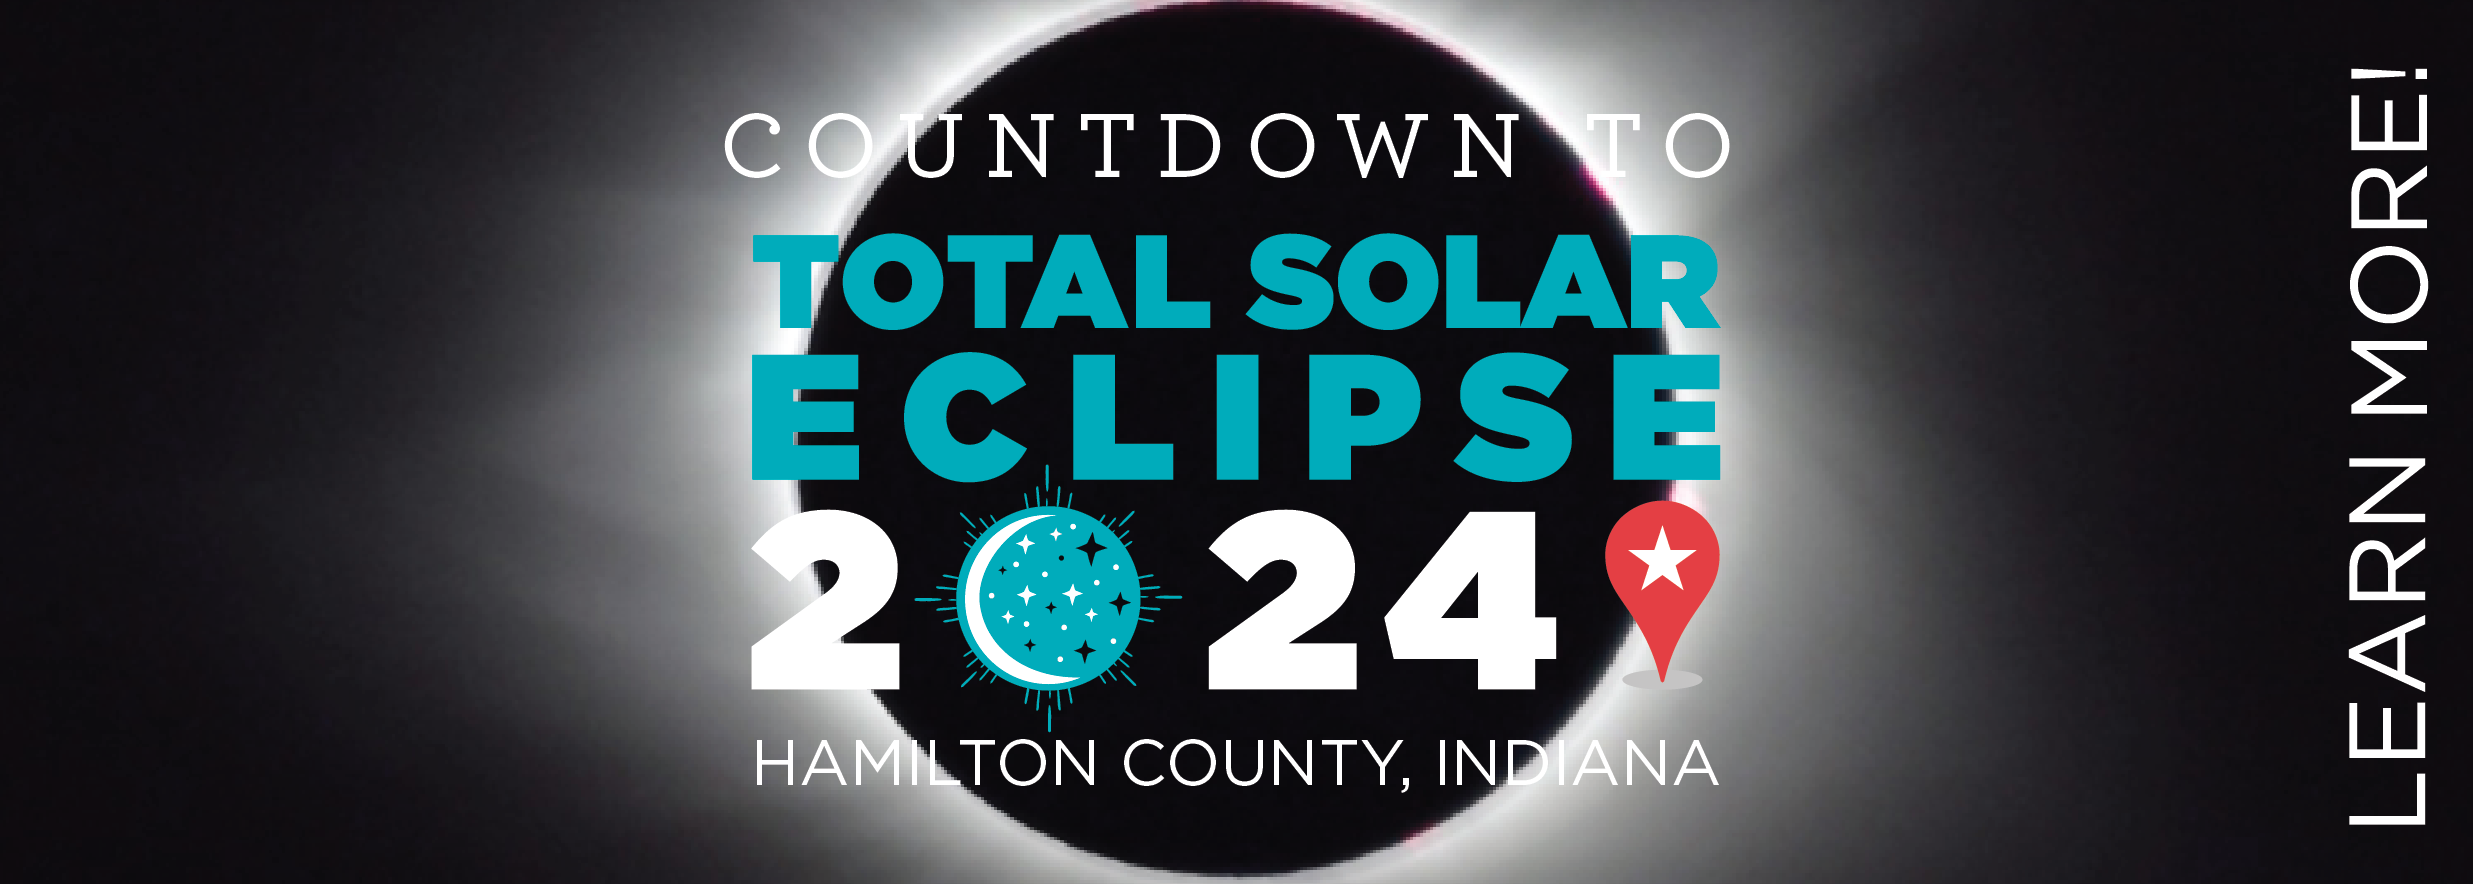 Countdown to the Total Solar Eclipse